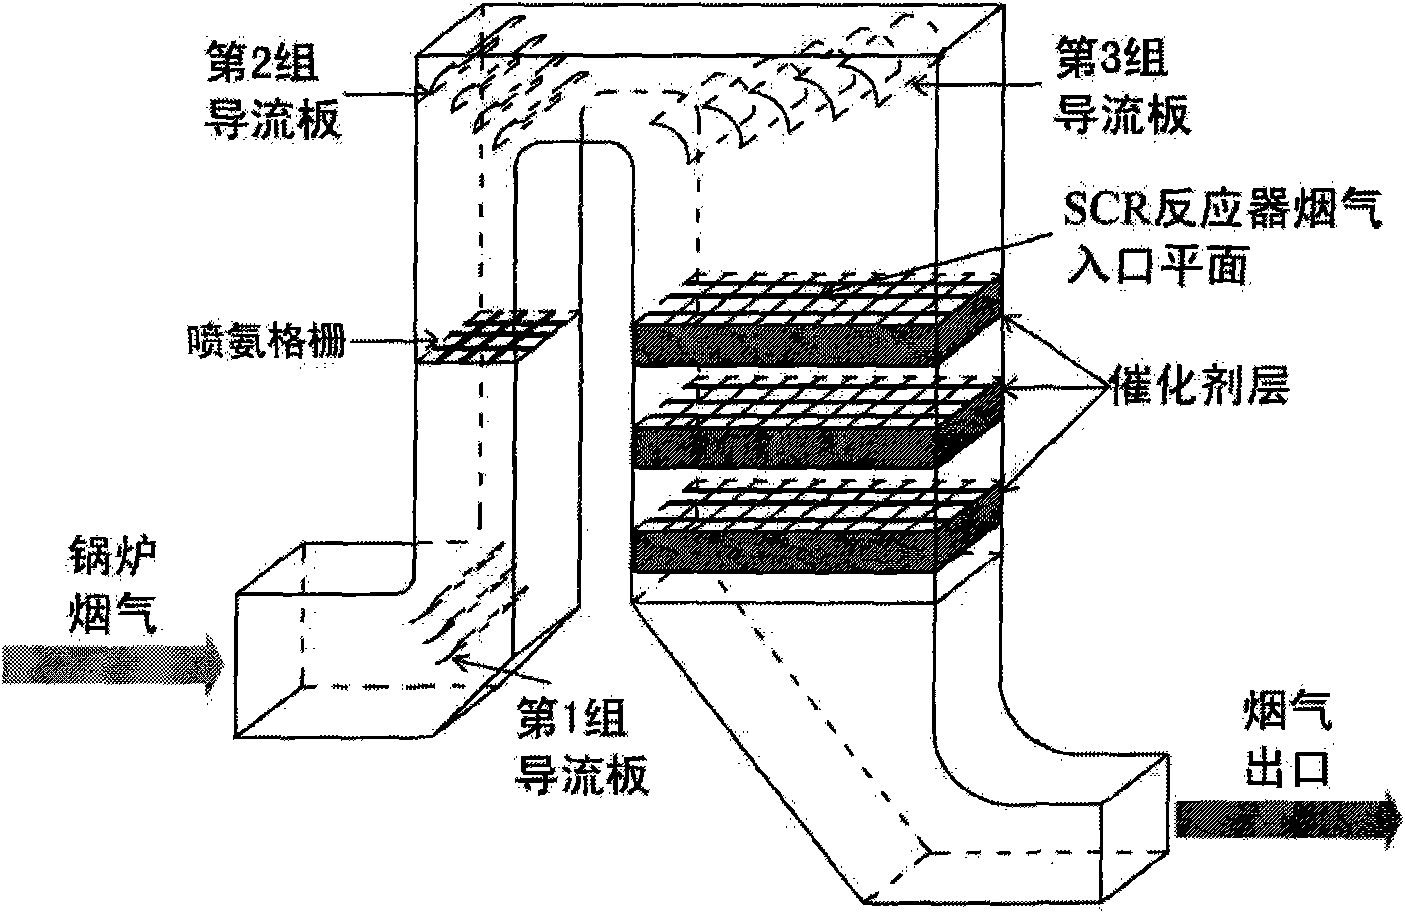 Flue gas flow equalizing and guiding assembly of selective catalyctic reduction (SCR) denitration reactor inlet